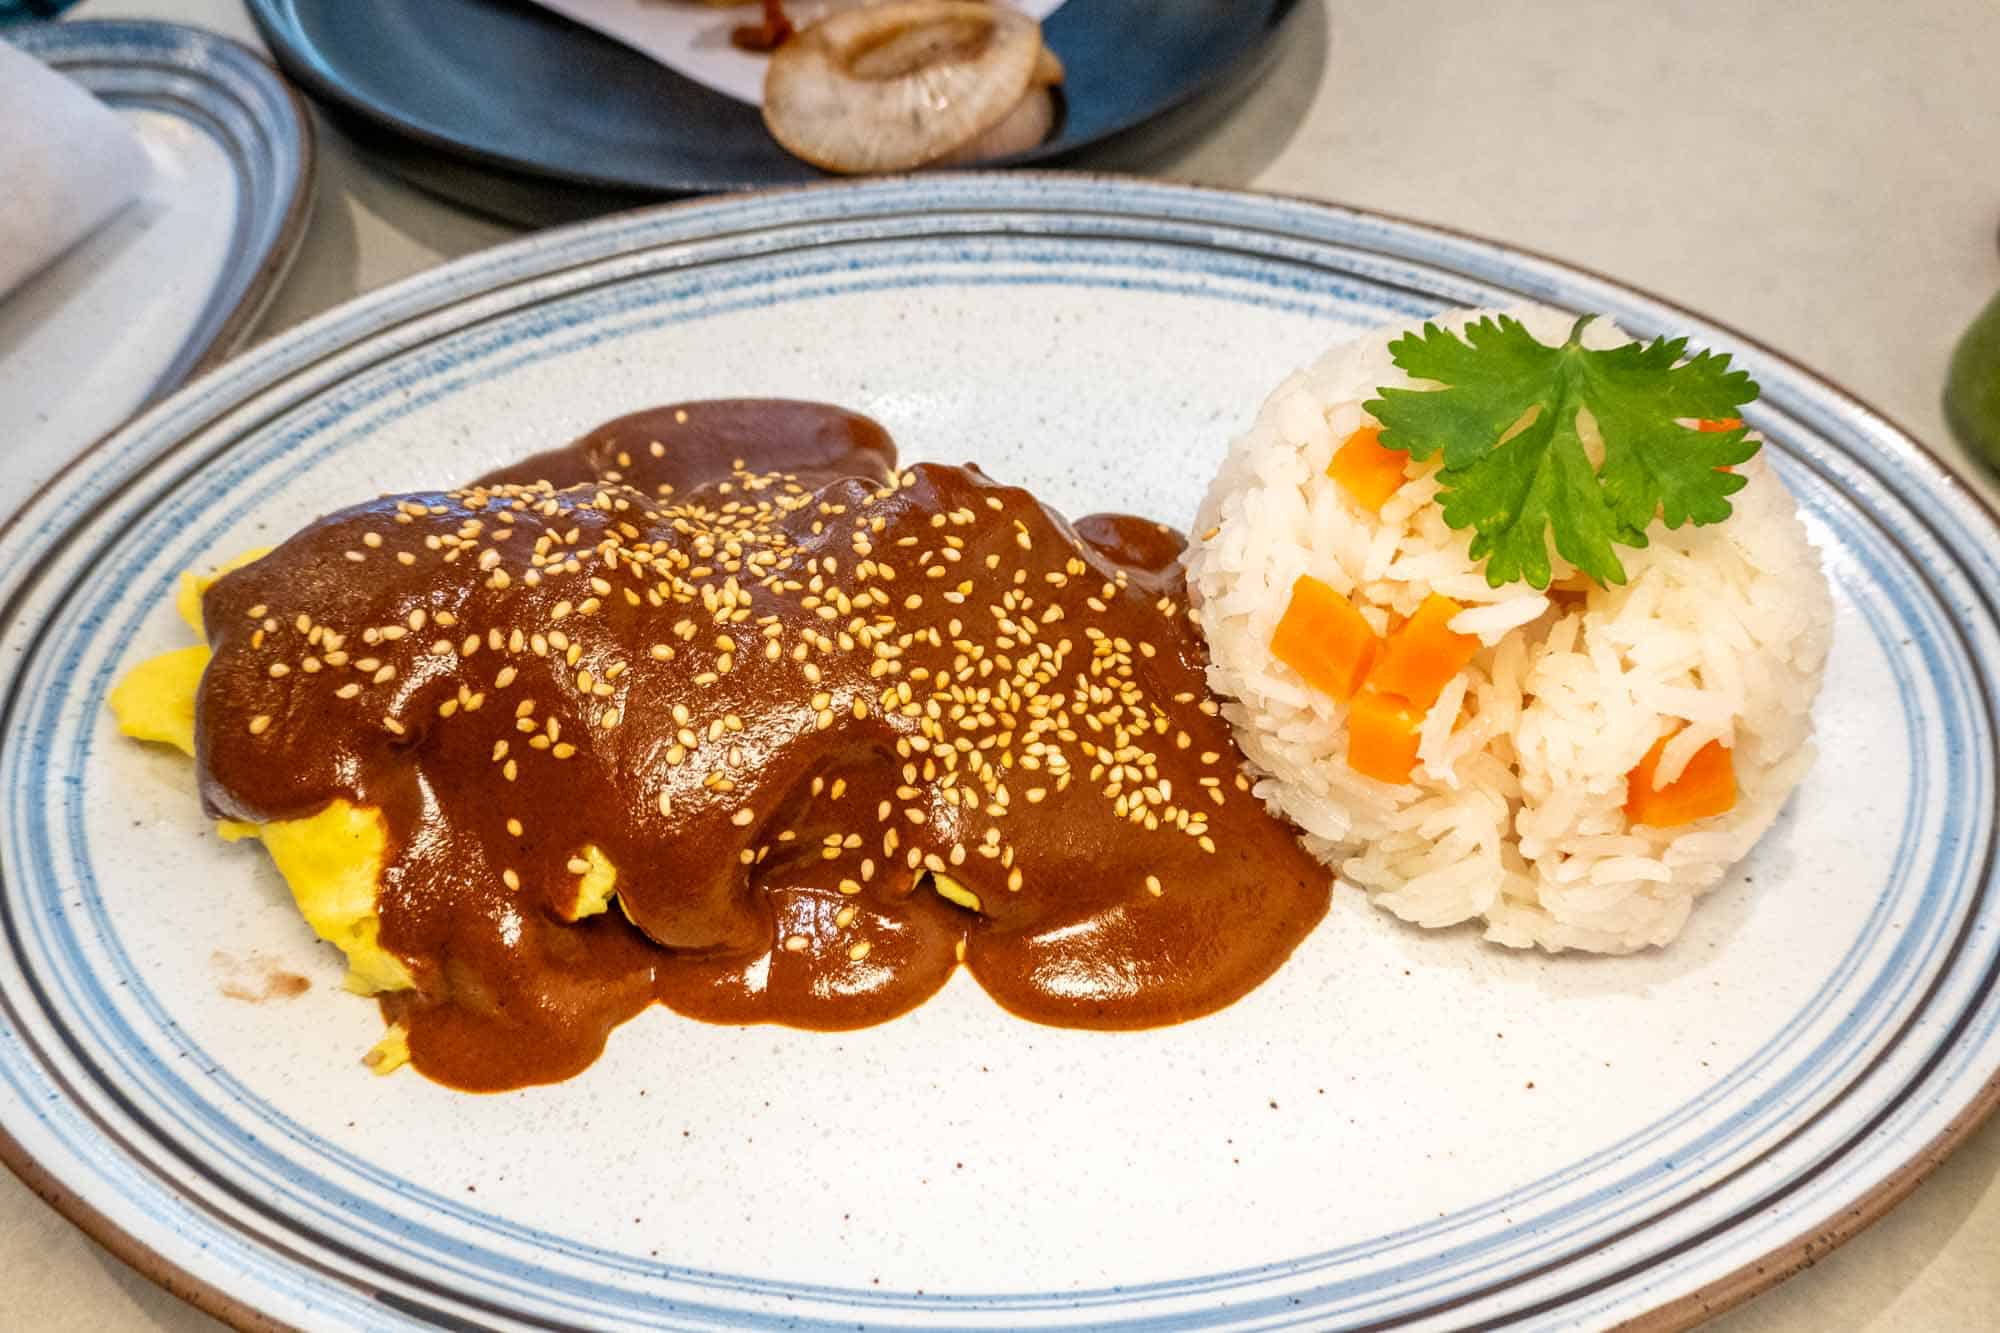 Scrambled eggs covered with mole next to rice on a plate